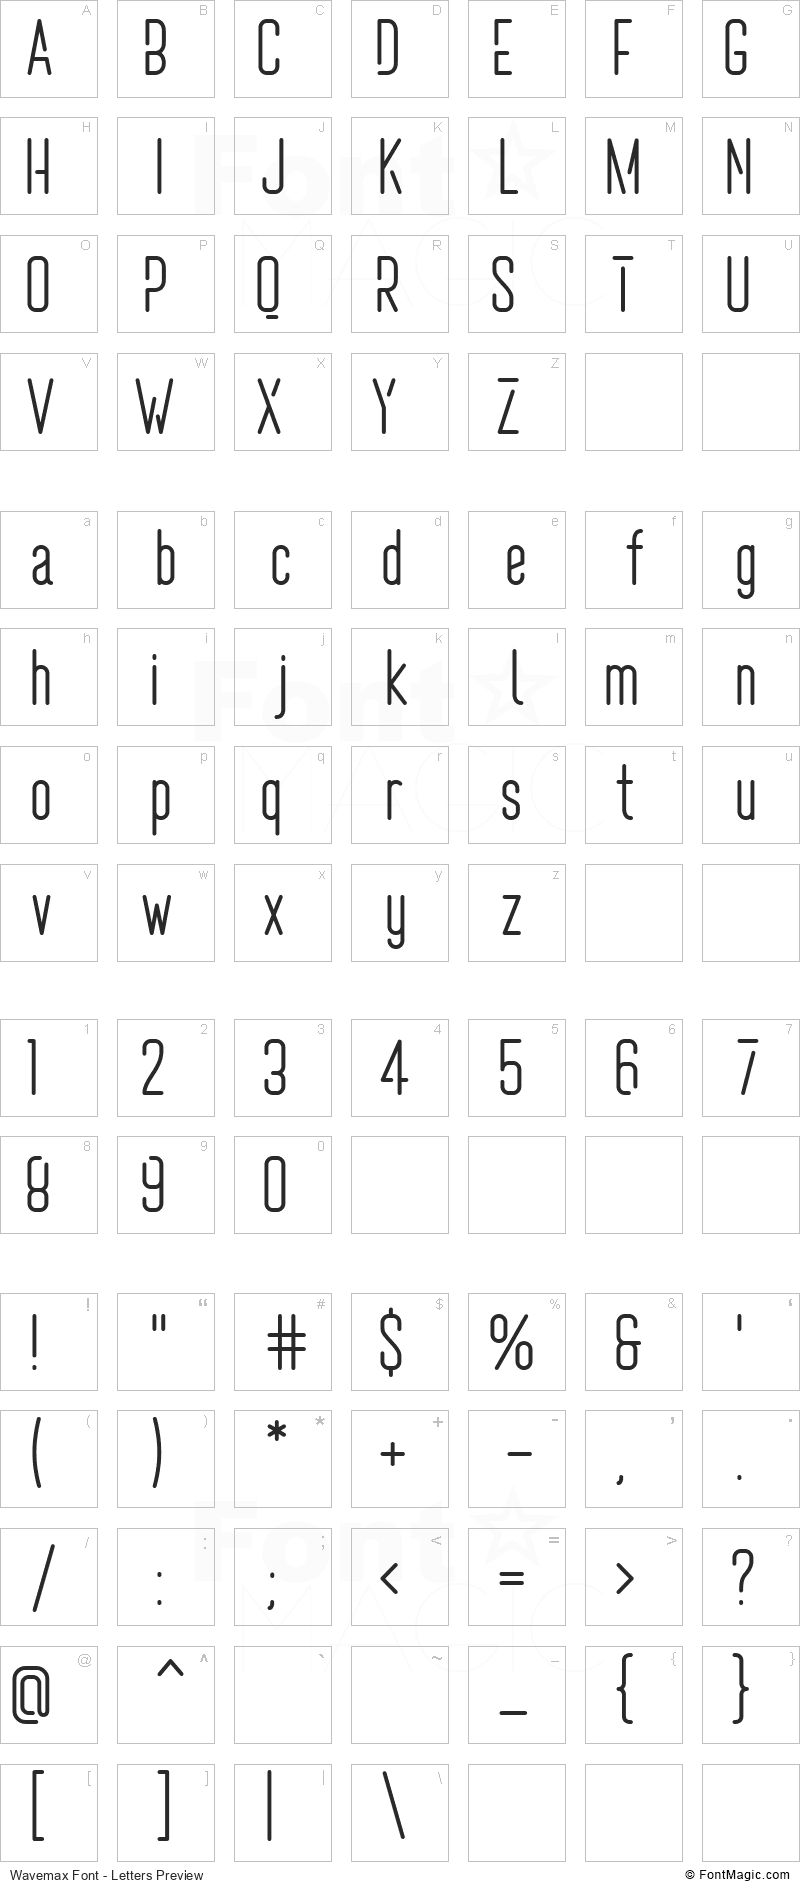 Wavemax Font - All Latters Preview Chart